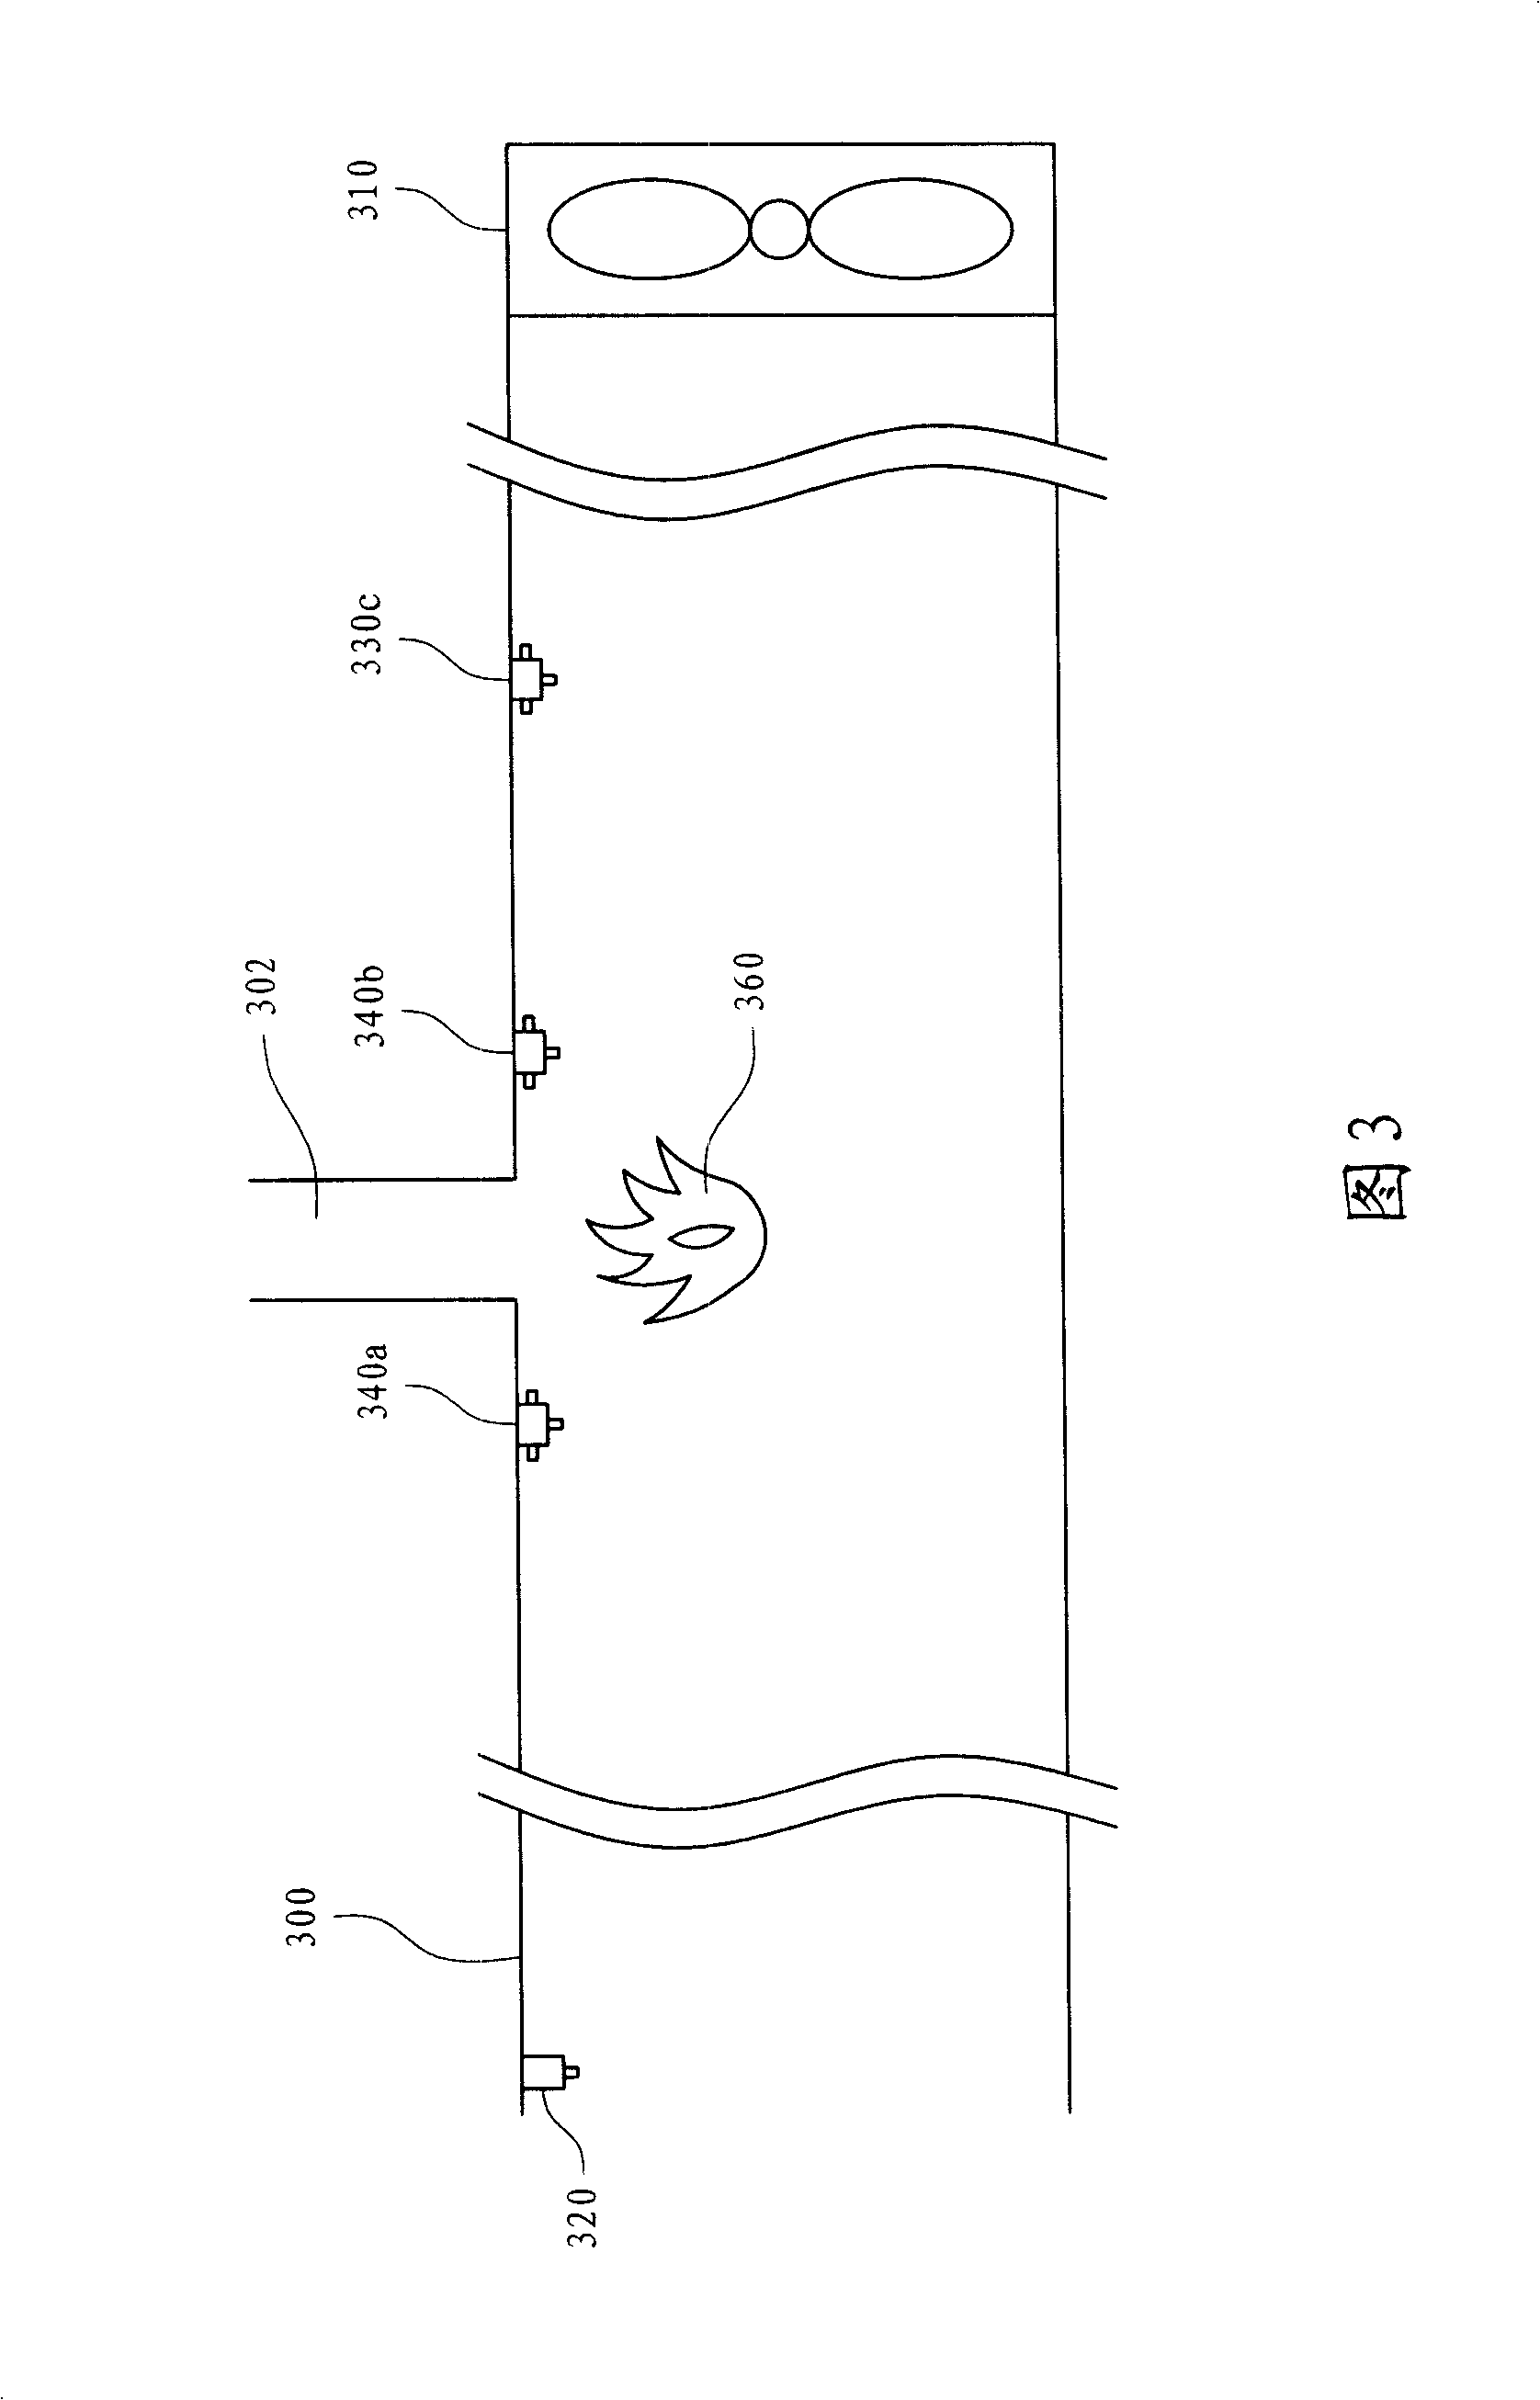 Long channel water fire extinguishing system and method